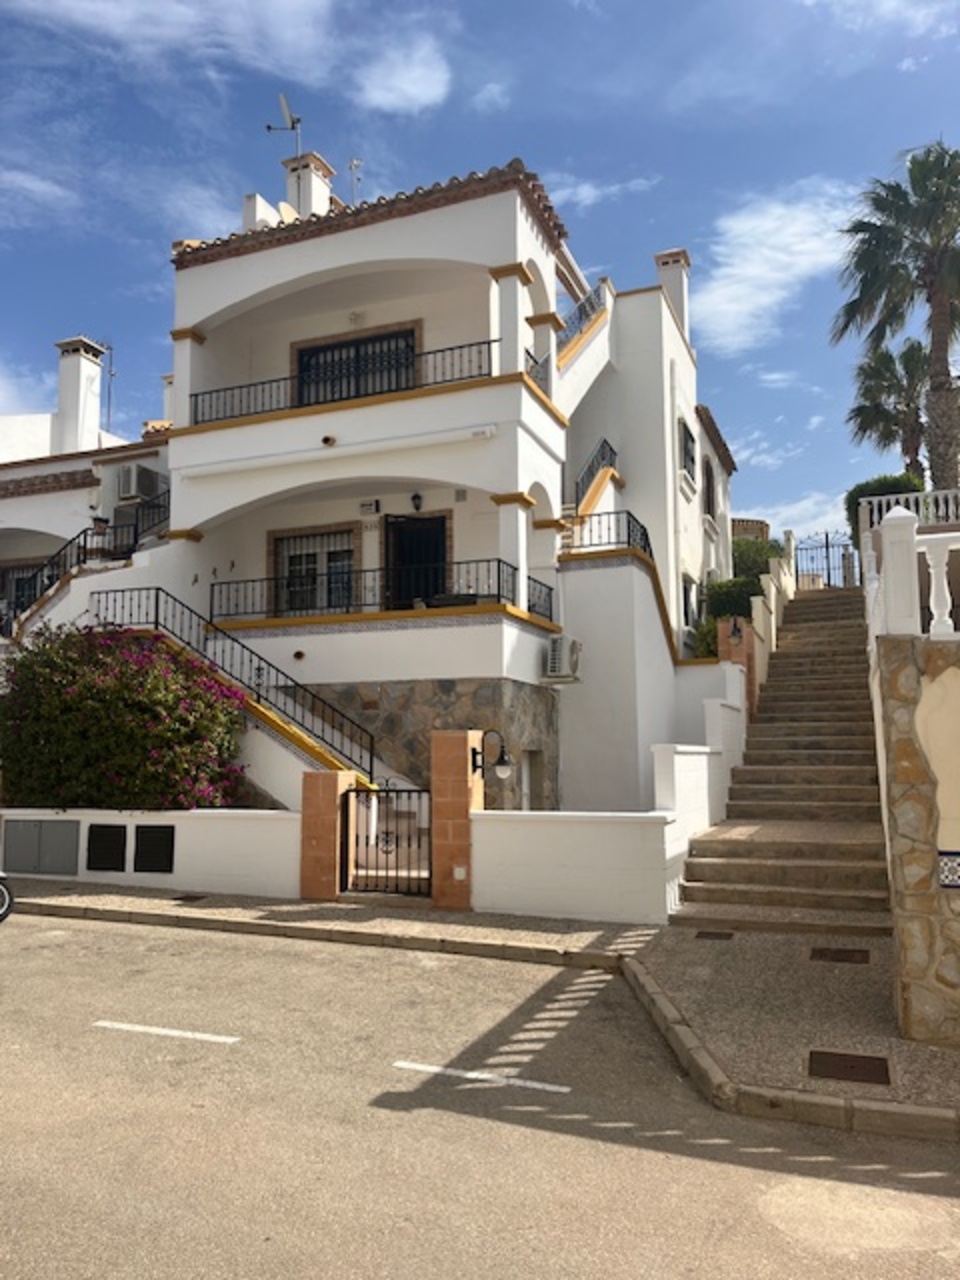 For sale: 2 bedroom apartment / flat in Los Dolses, Costa Blanca